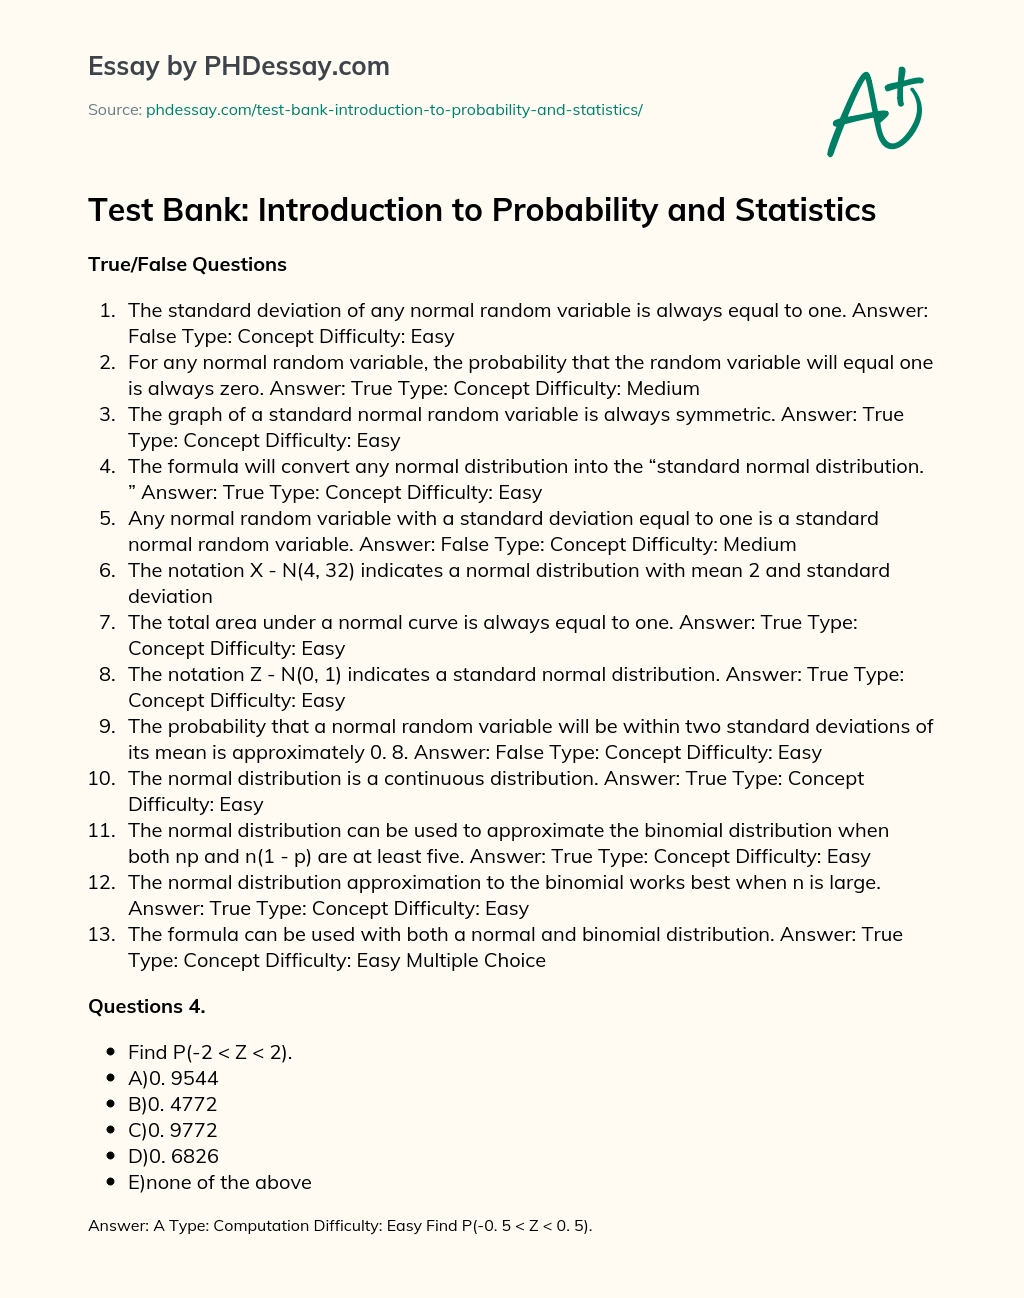 Test Bank: Introduction to Probability and Statistics essay